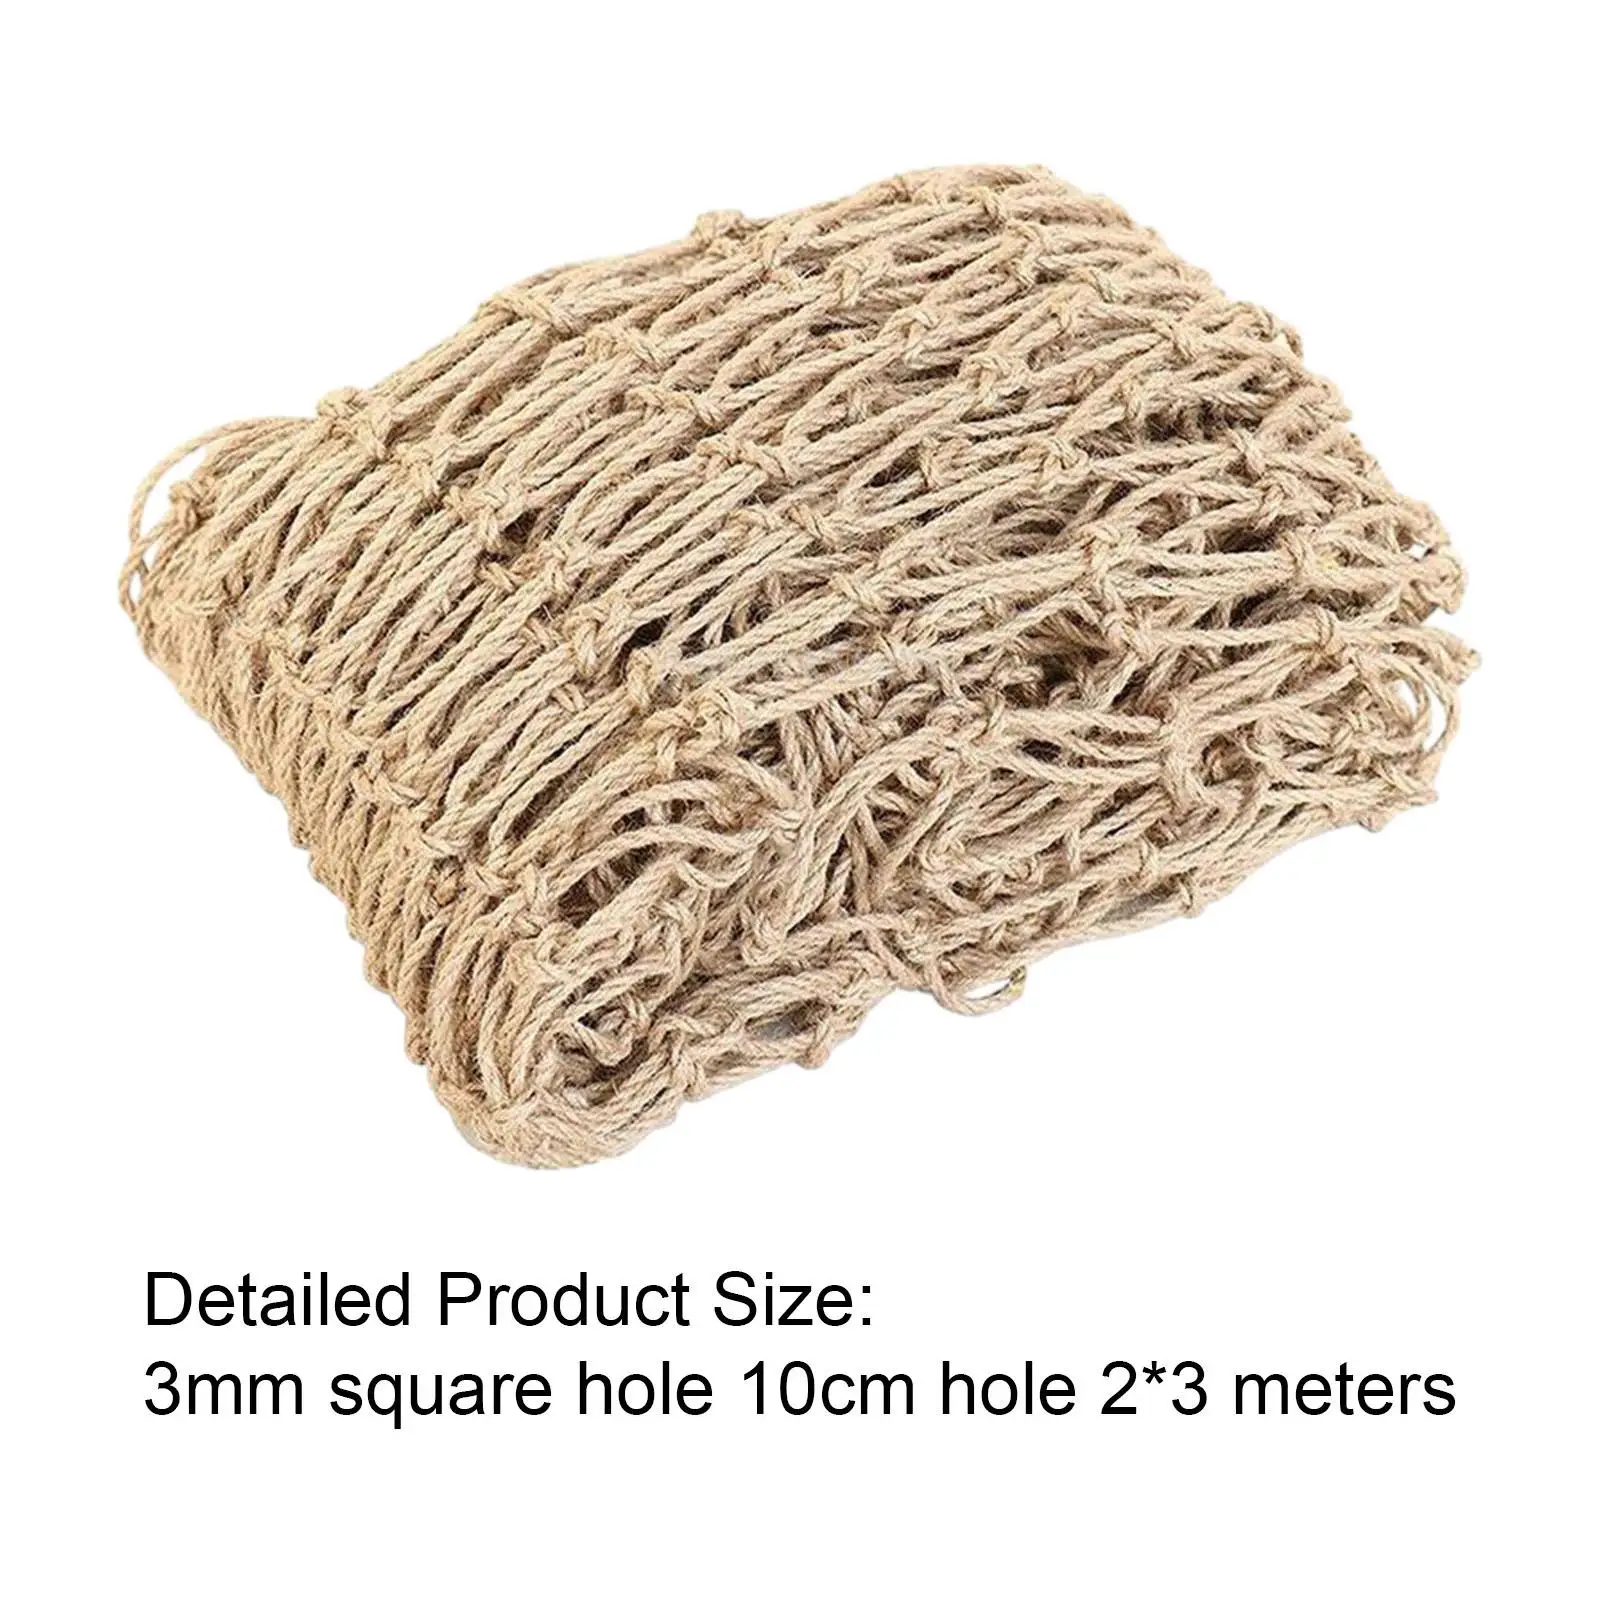 

2x3 Meters Plant Support Netting 10cmx10cm Hole Durable Eco Friendly Multifunctional for Gardening Peas Beans Accessories